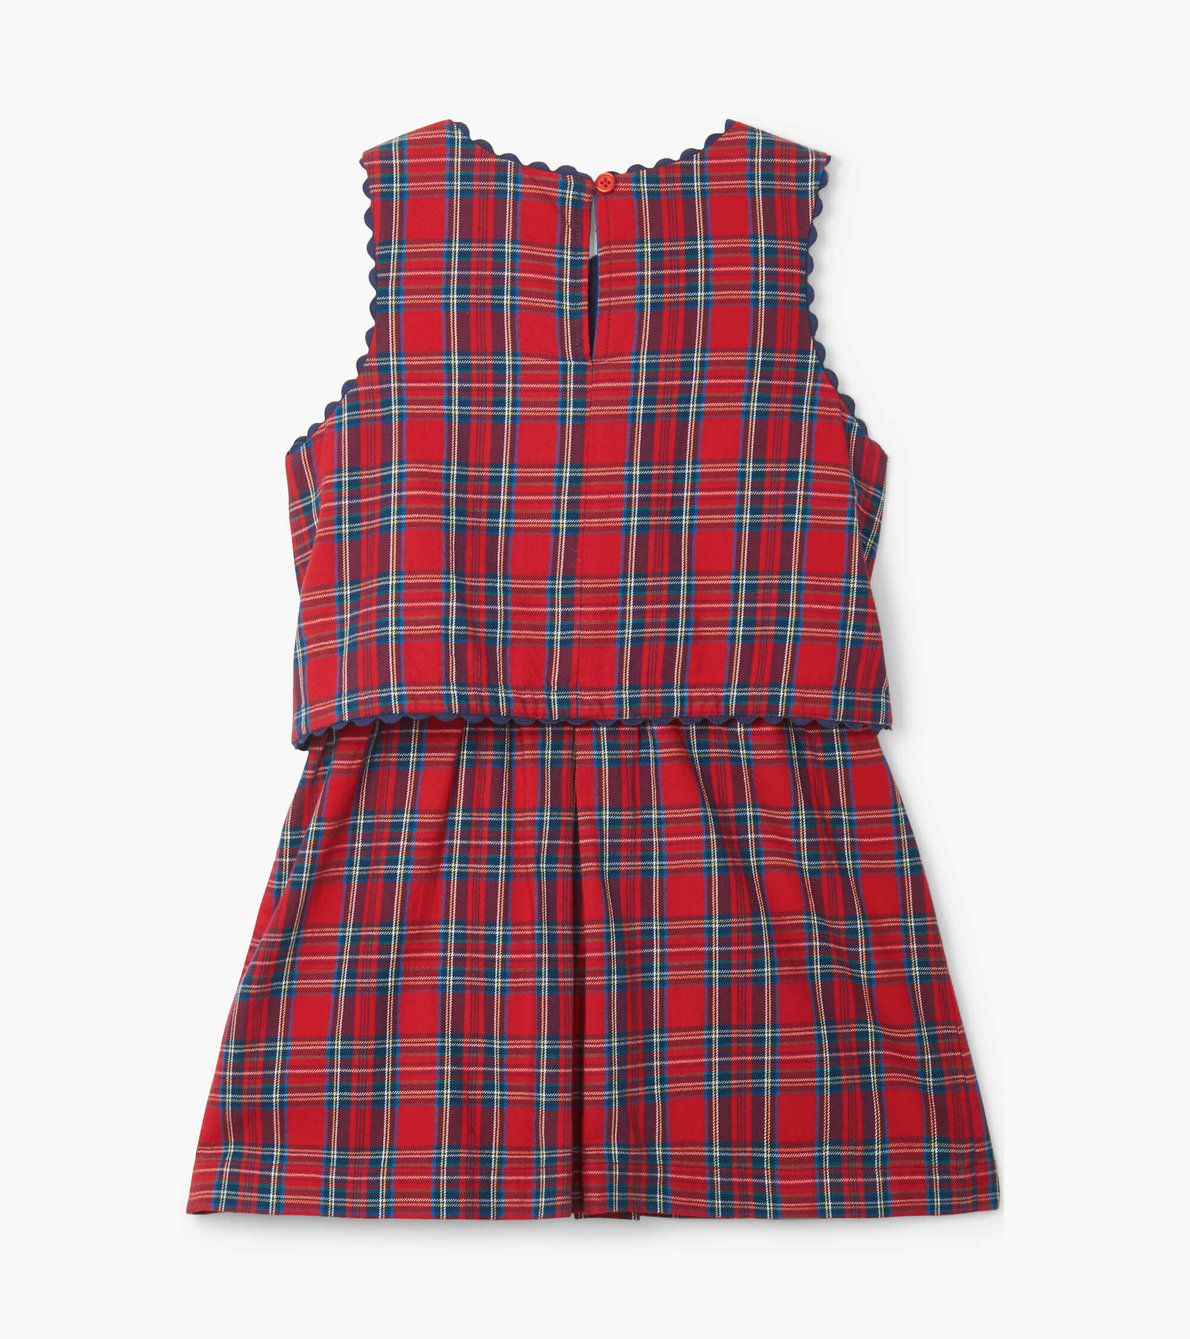 View larger image of Holiday Plaid Layered Dress